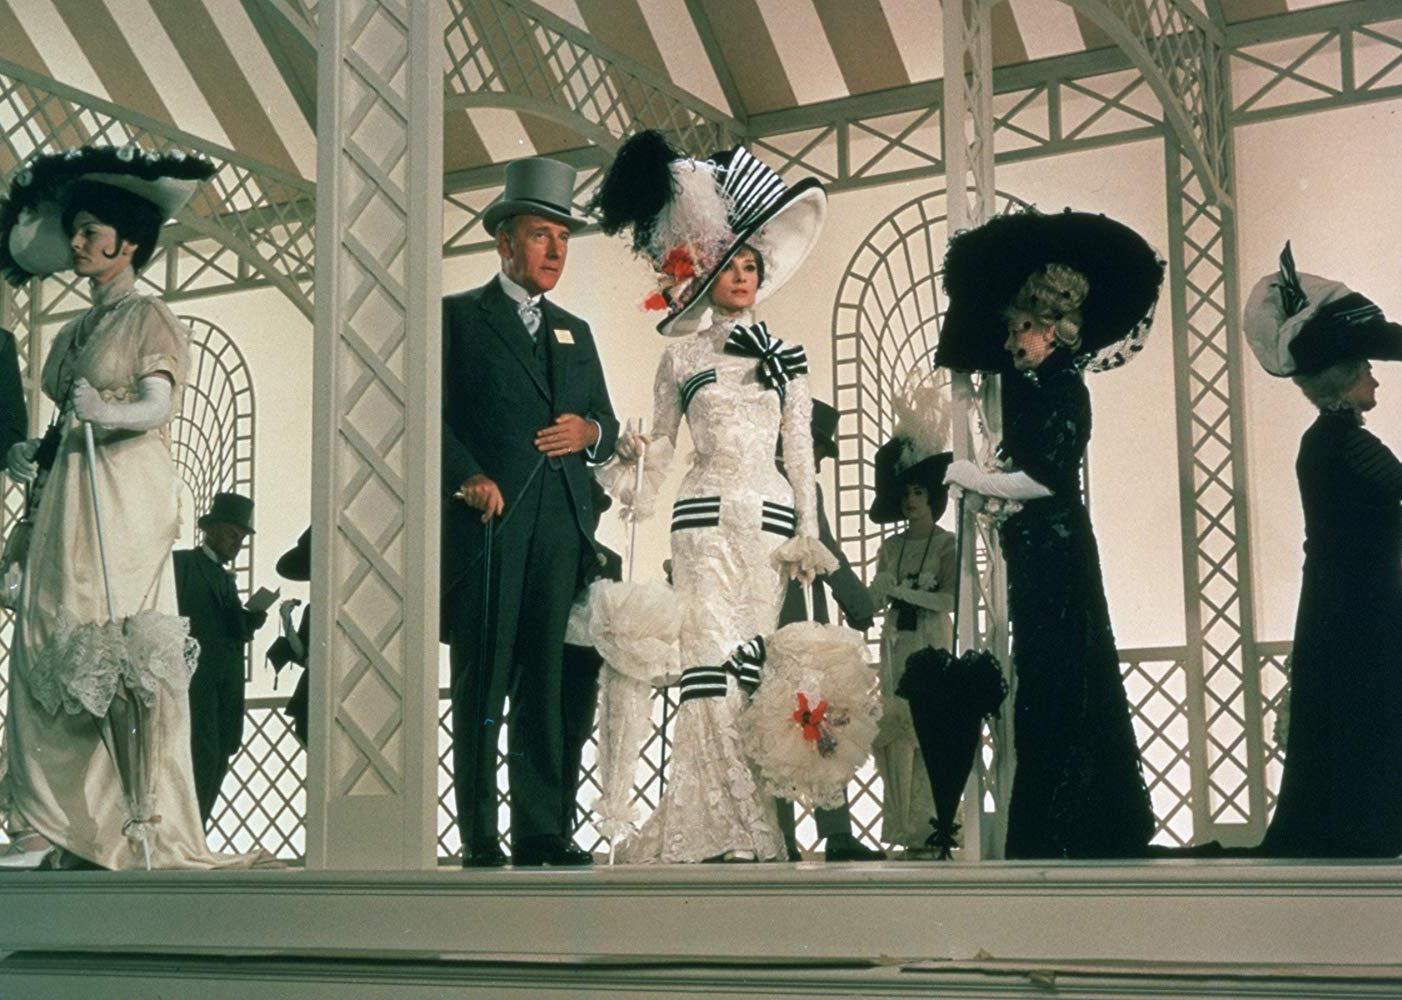 Audrey Hepburn in a beautiful gown and hat arm in arm with a man in a gray suit.